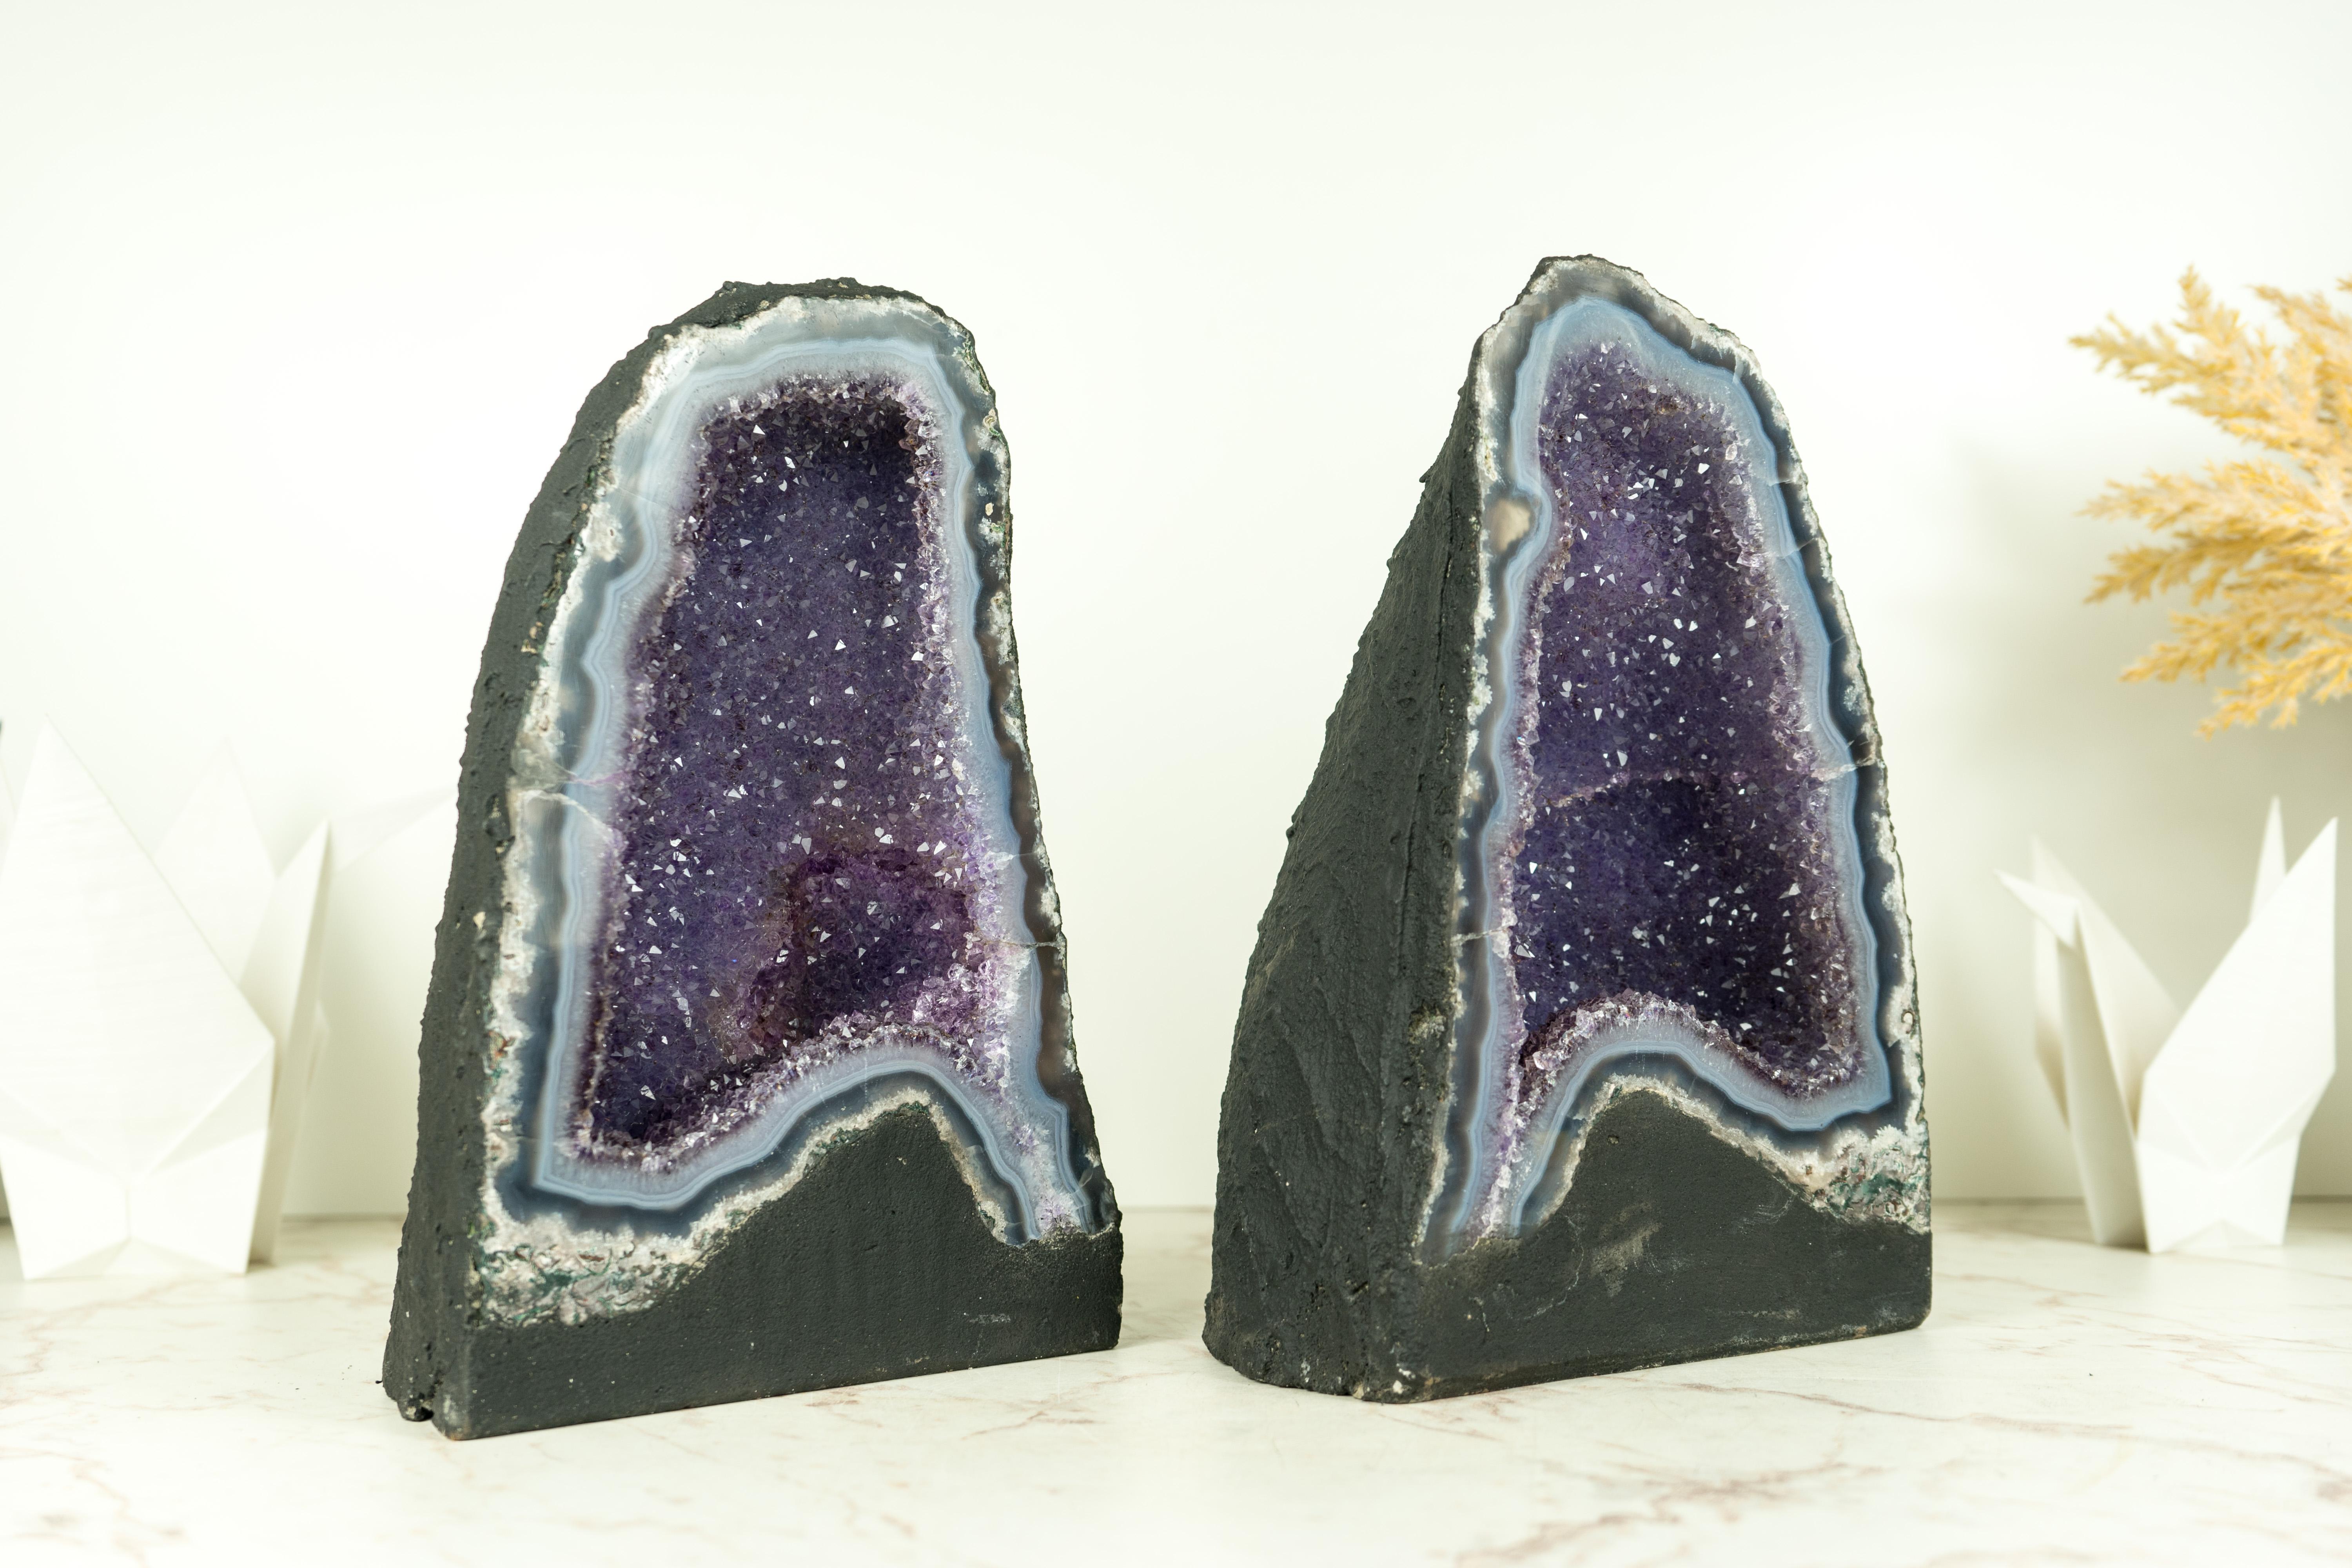 Pair of High-Grade Small Blue Lace Agate Geodes with Sparkly Lavender Amethyst For Sale 4